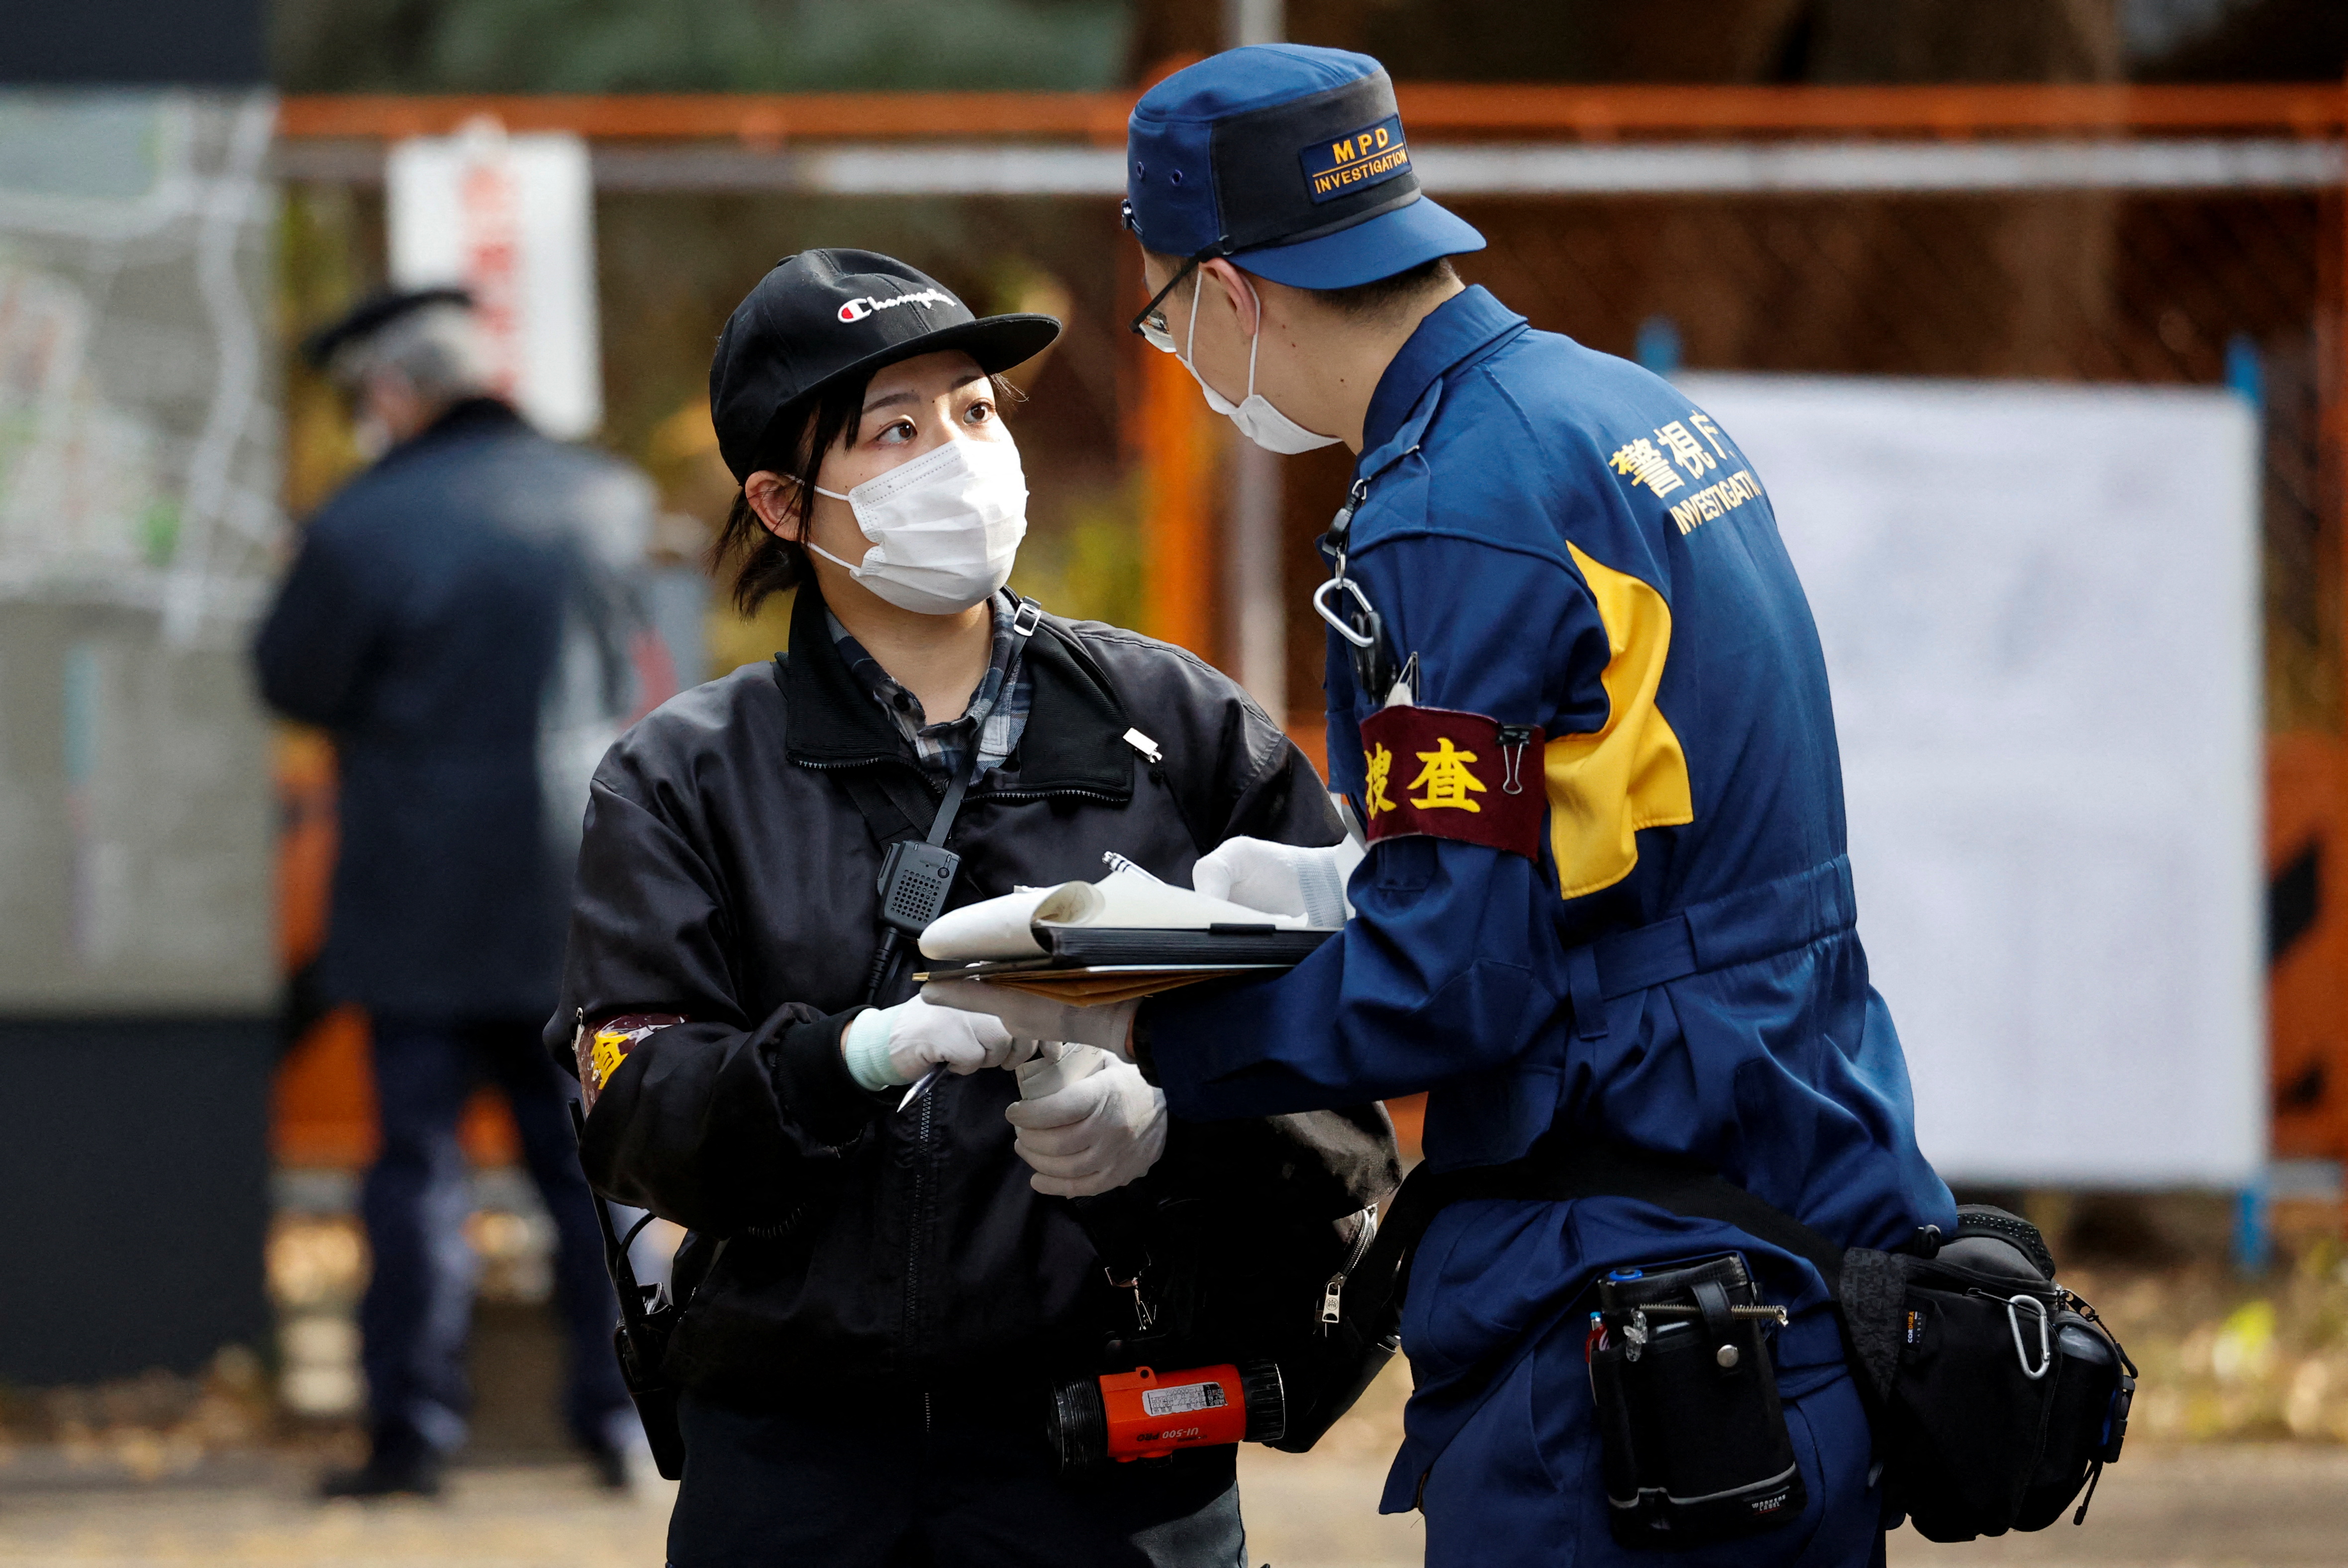 A police investigator speaks to another person at the site where a stabbing incident happened at an entrance gate of Tokyo University in Tokyo, Japan January 15, 2022. REUTERS/Issei Kato